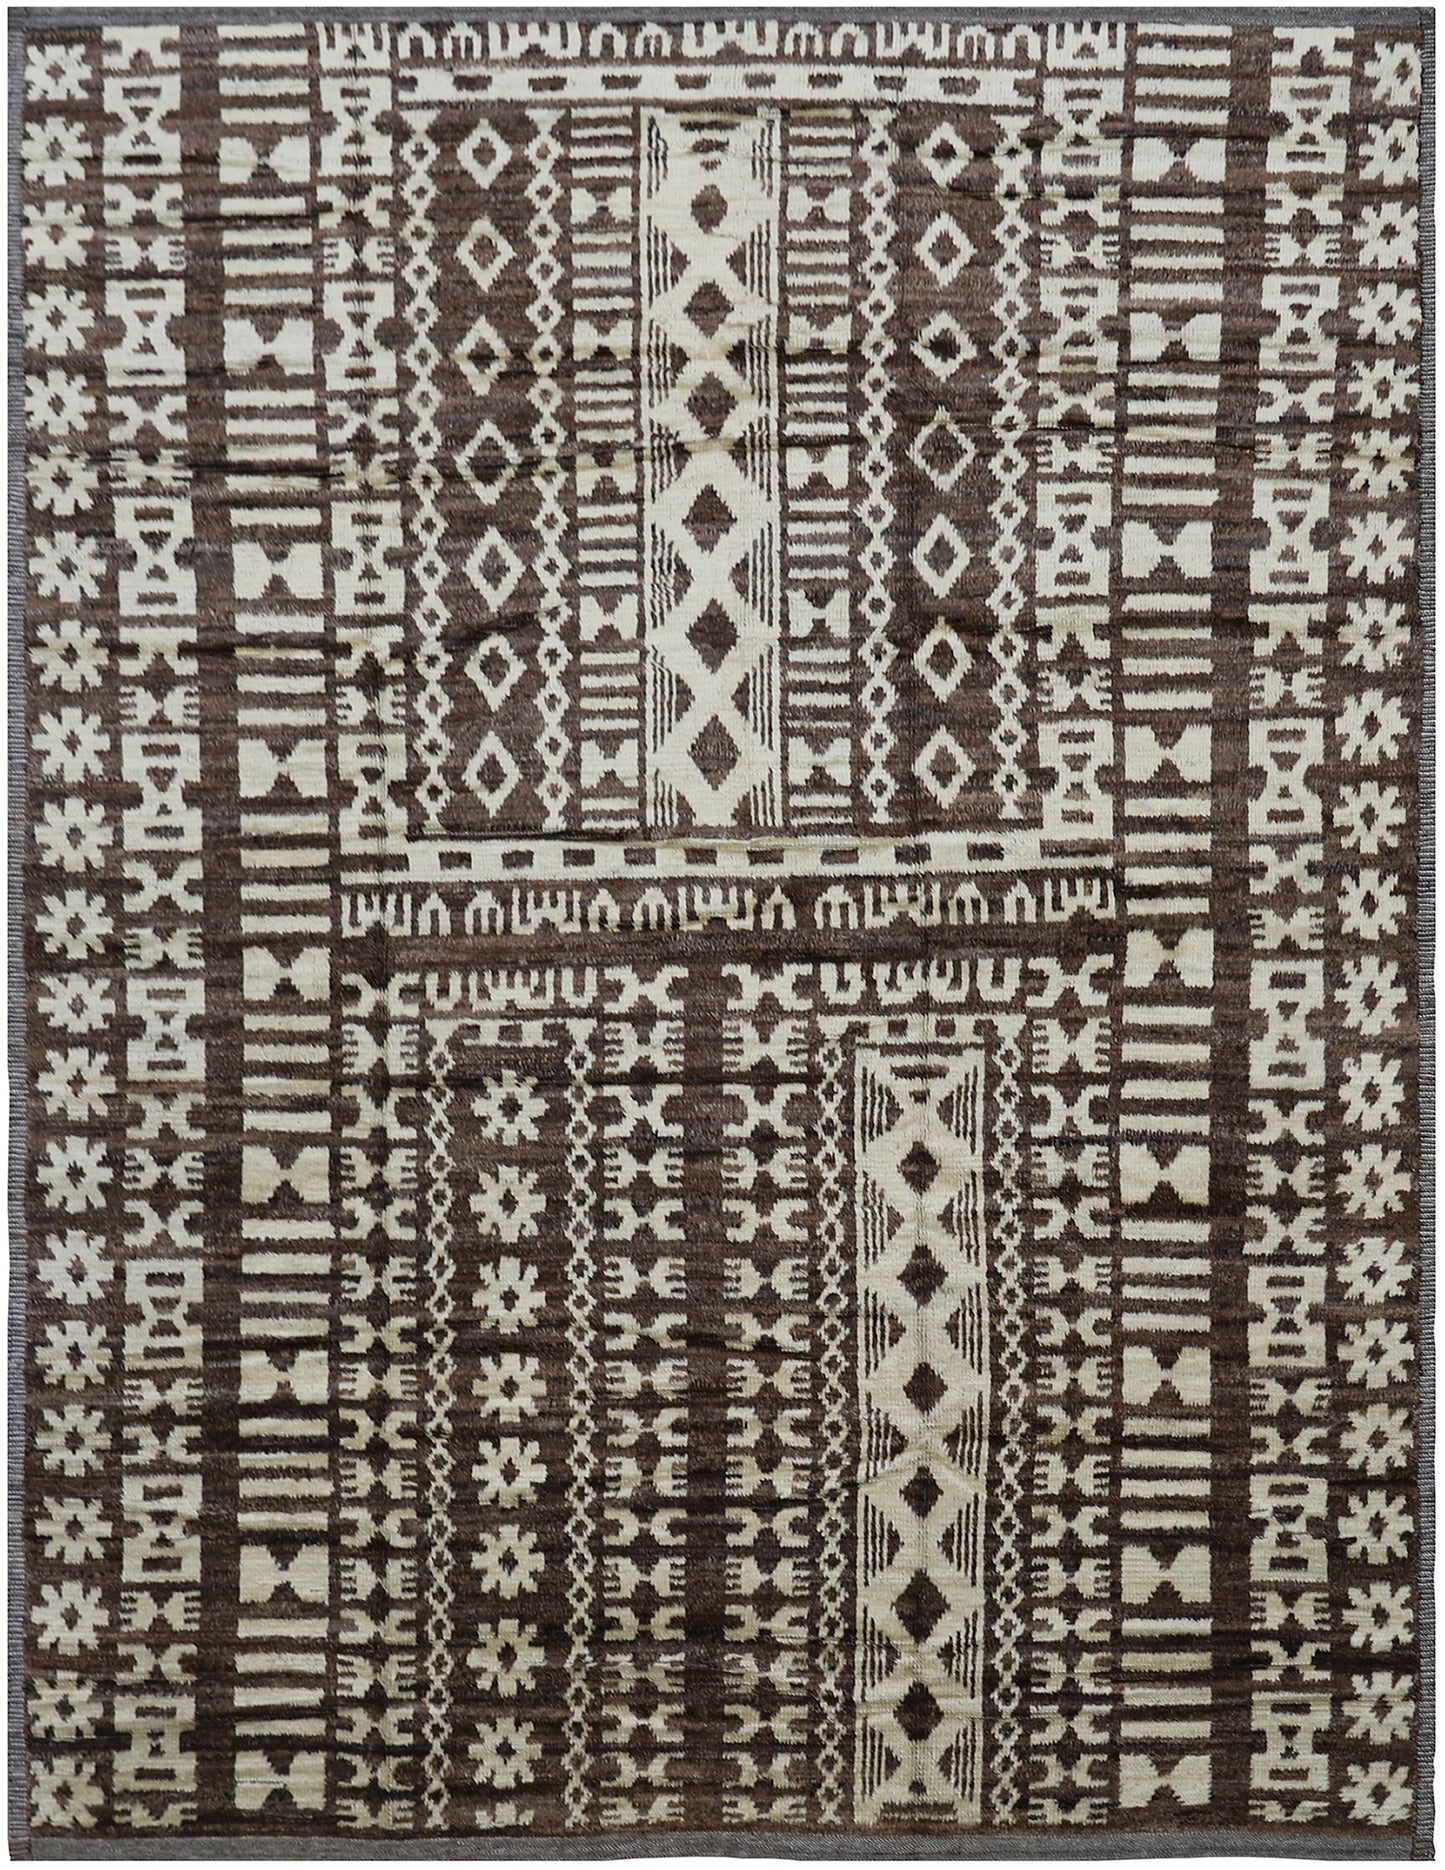 9'x12' Brown and White Contemporary Tribal Ariana Moroccan Style Barchi Rug